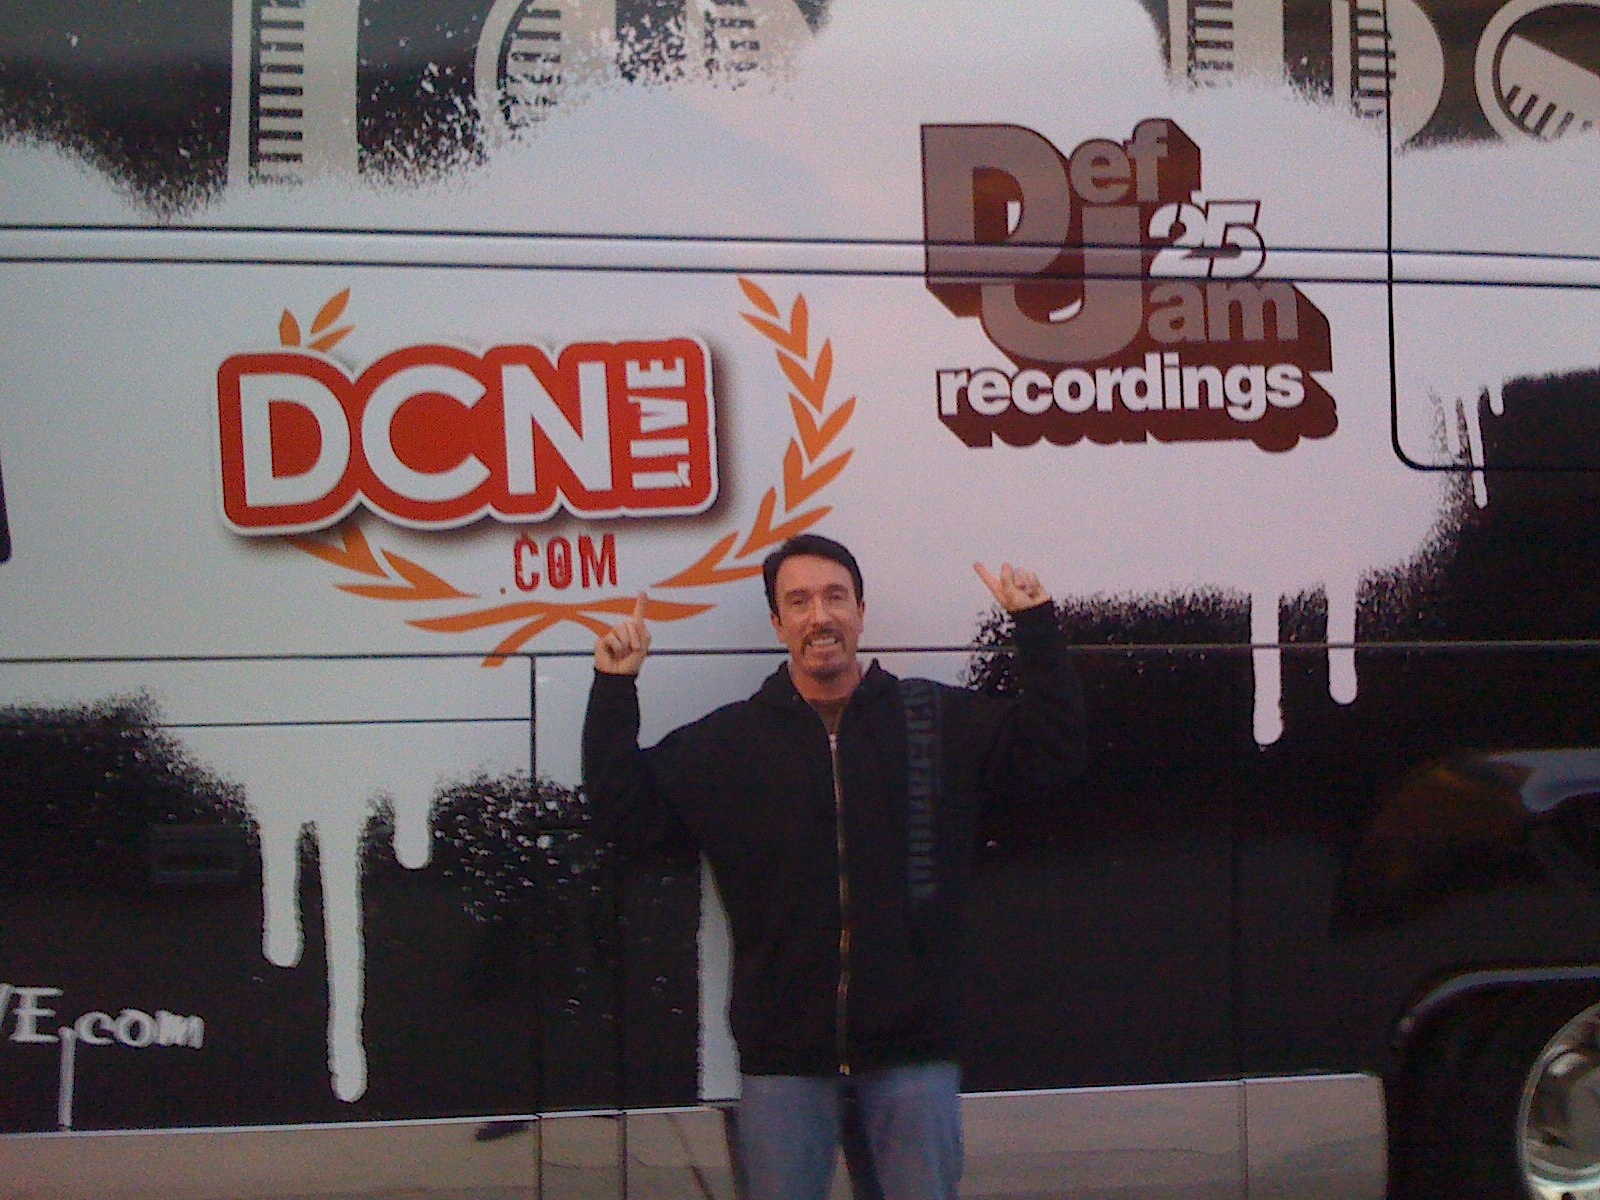 DCNLIVE.COM @ Event in Anaheim, CA With IDJ Recording Artists, 